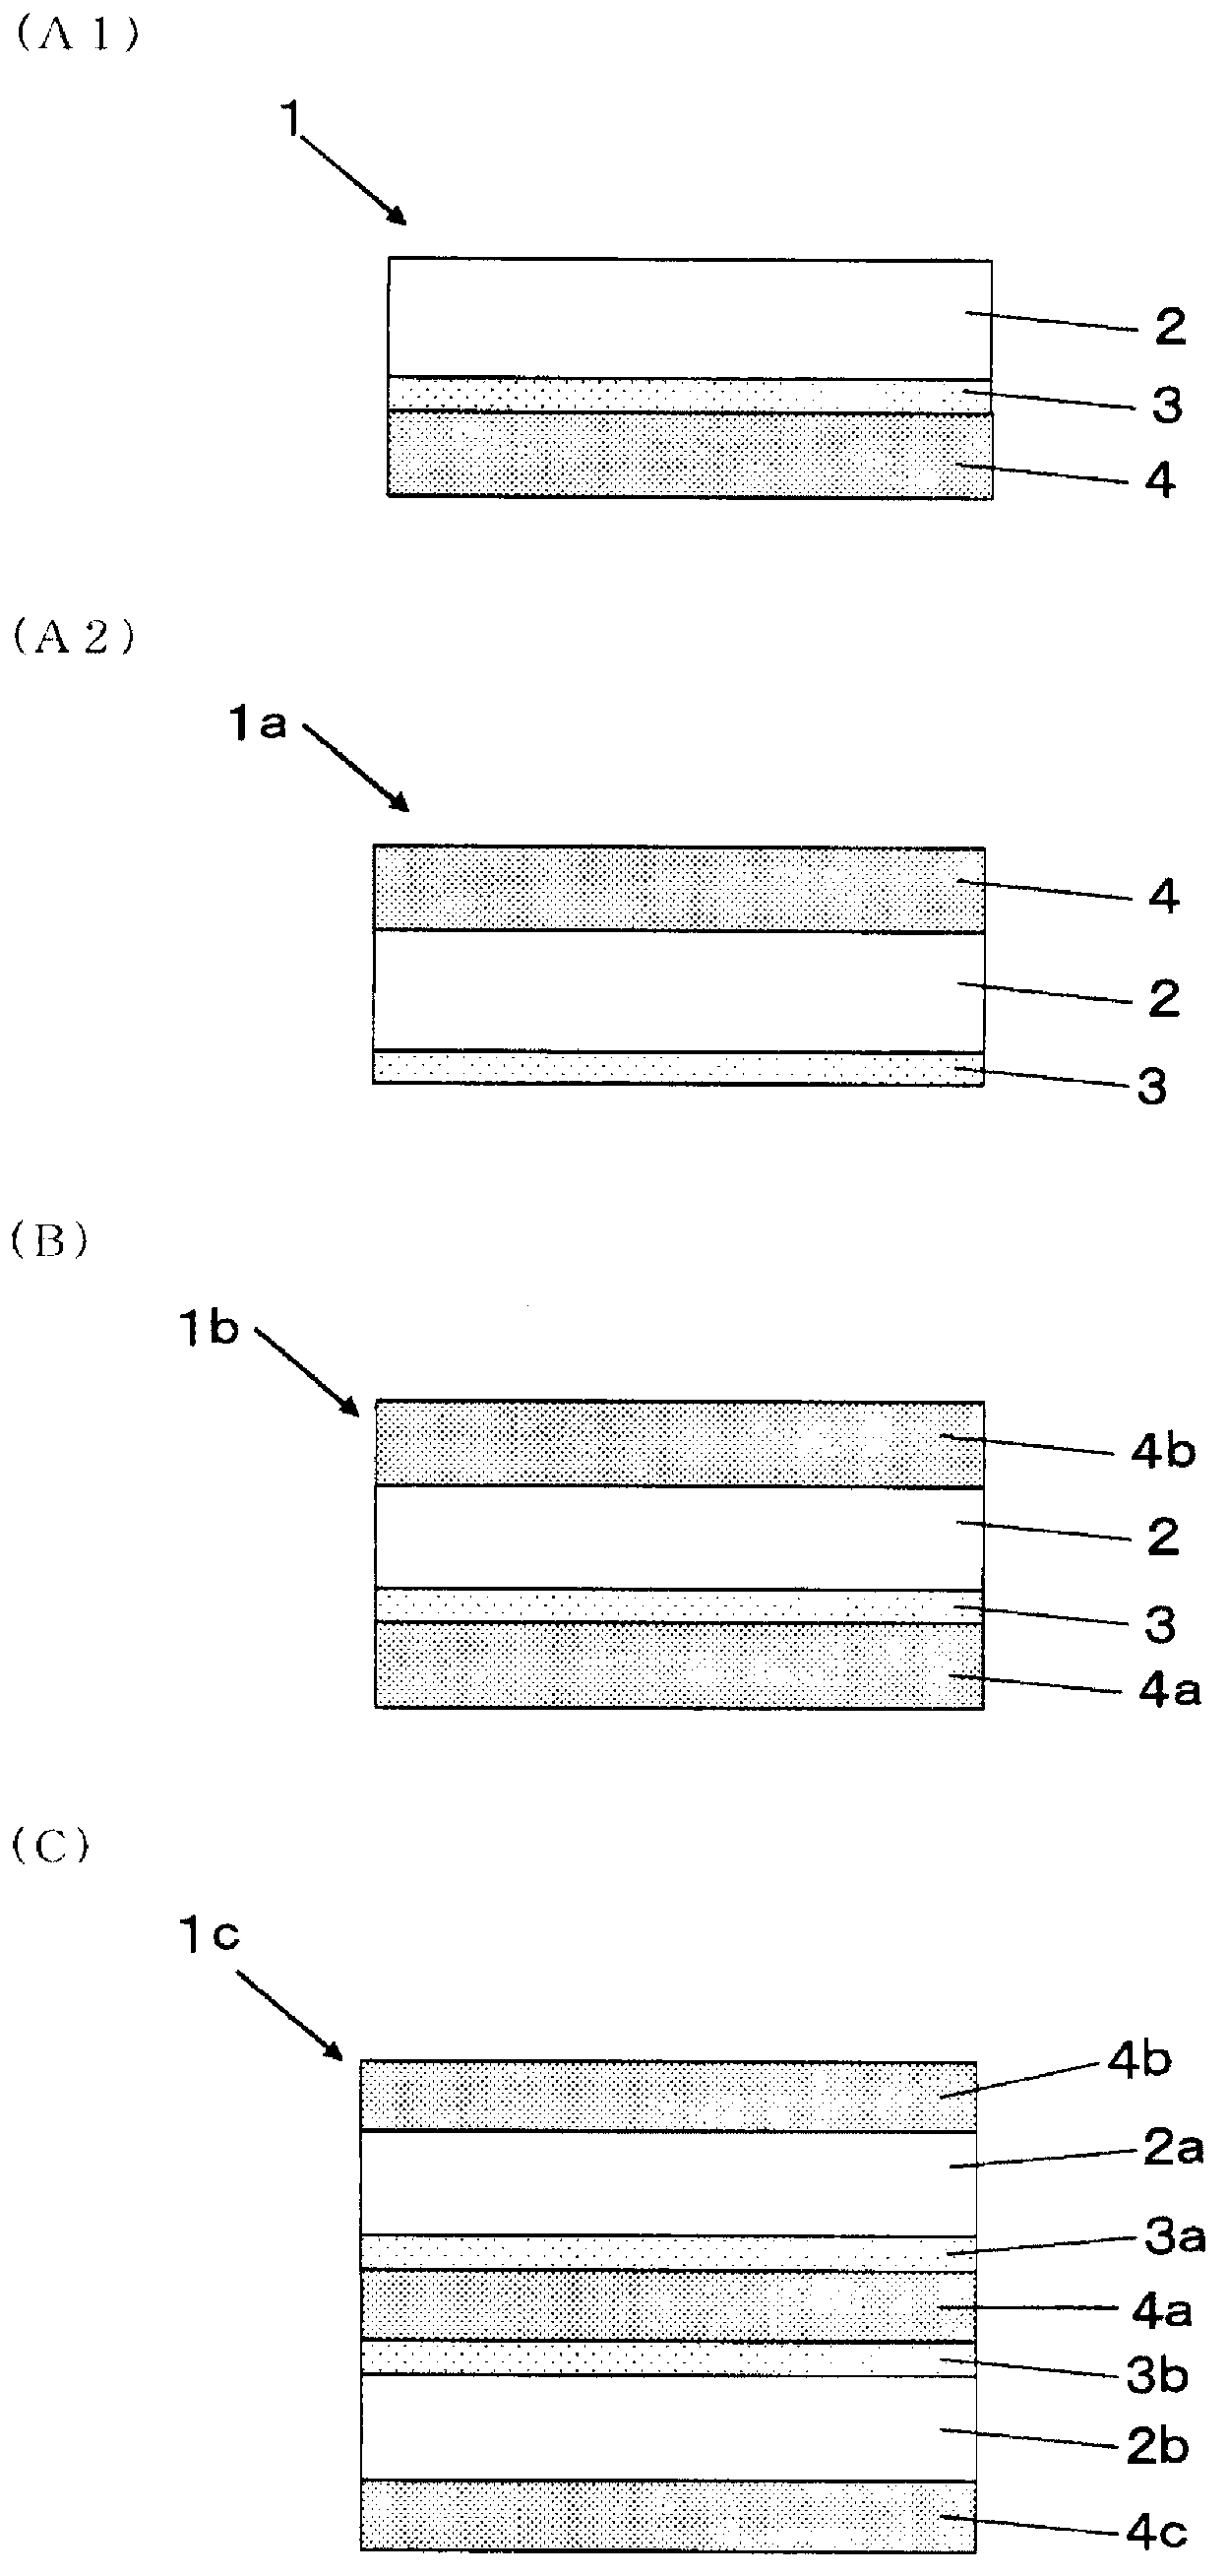 Adhesive sheet and electronic device